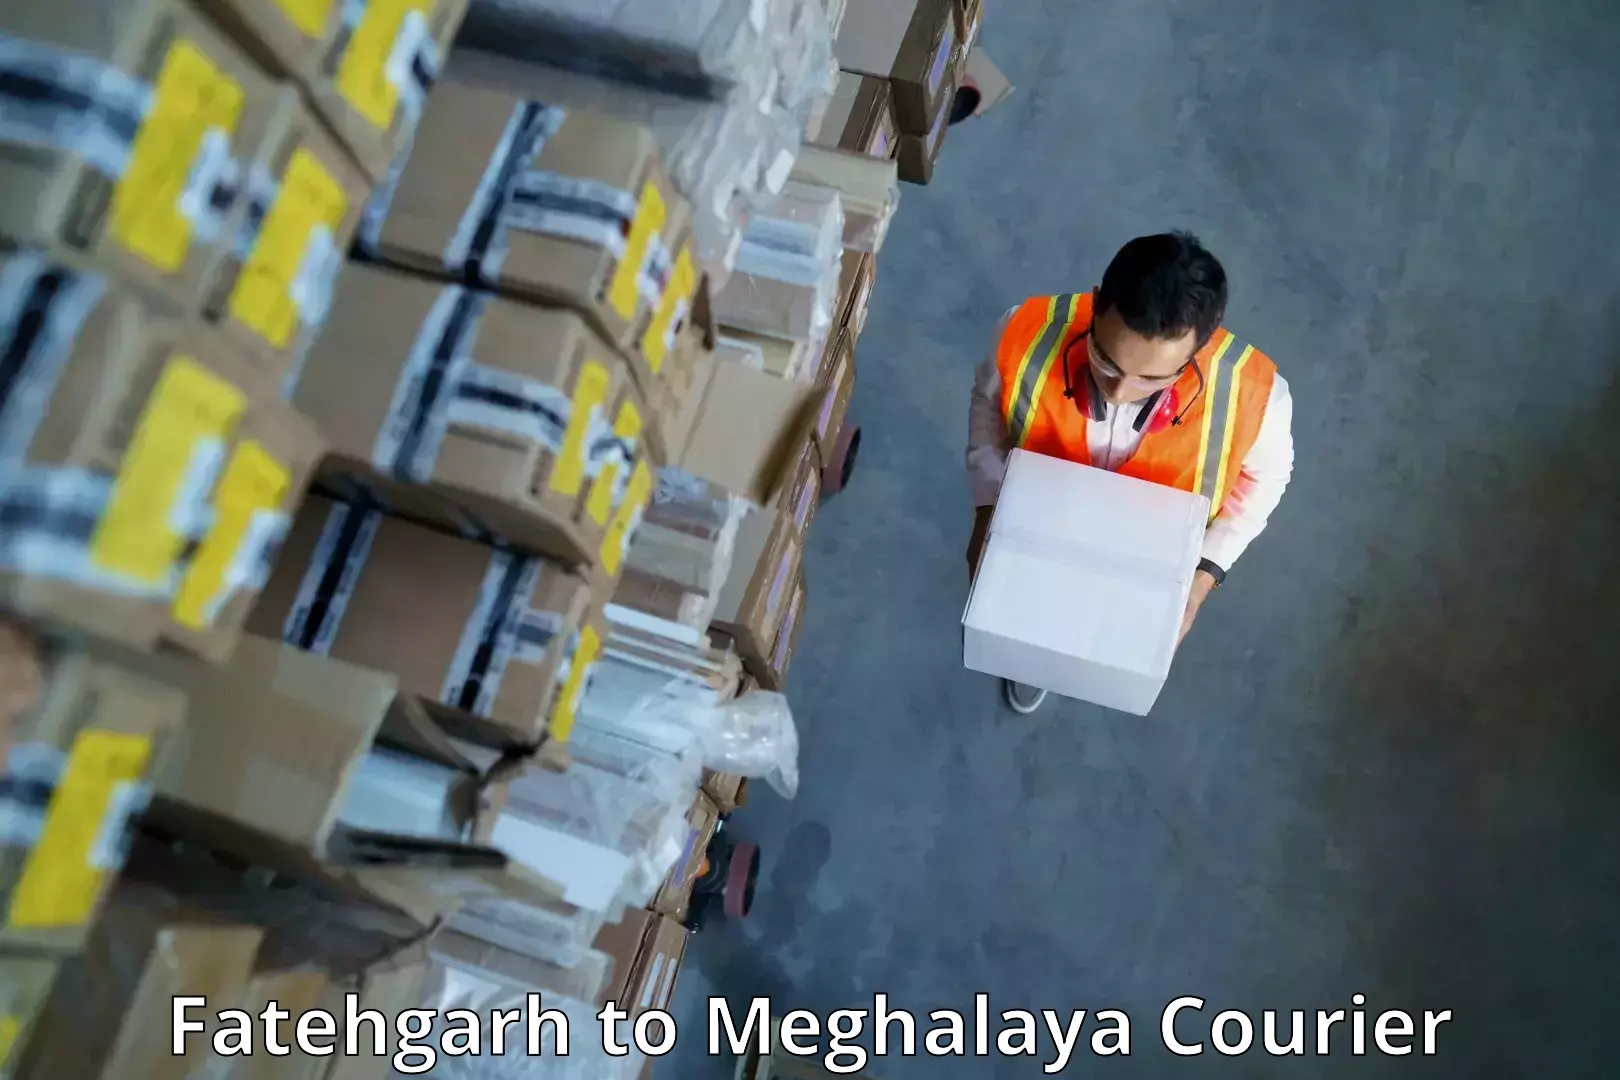 Professional courier handling Fatehgarh to Tura